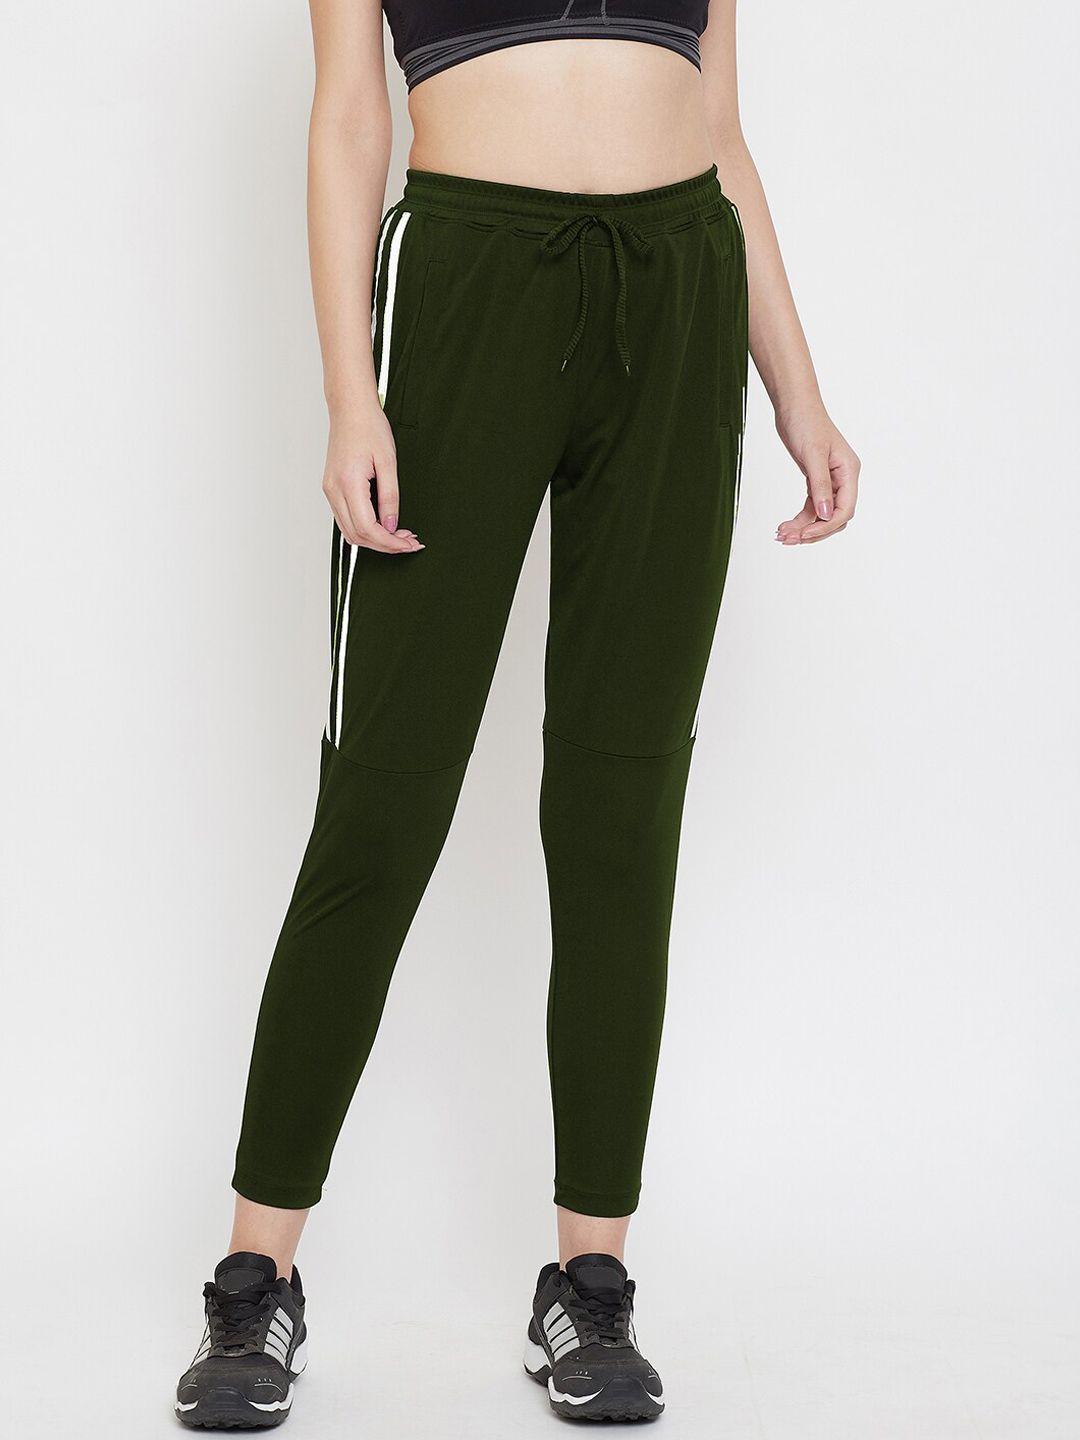 crease & clips women olive green solid slim fit track pants